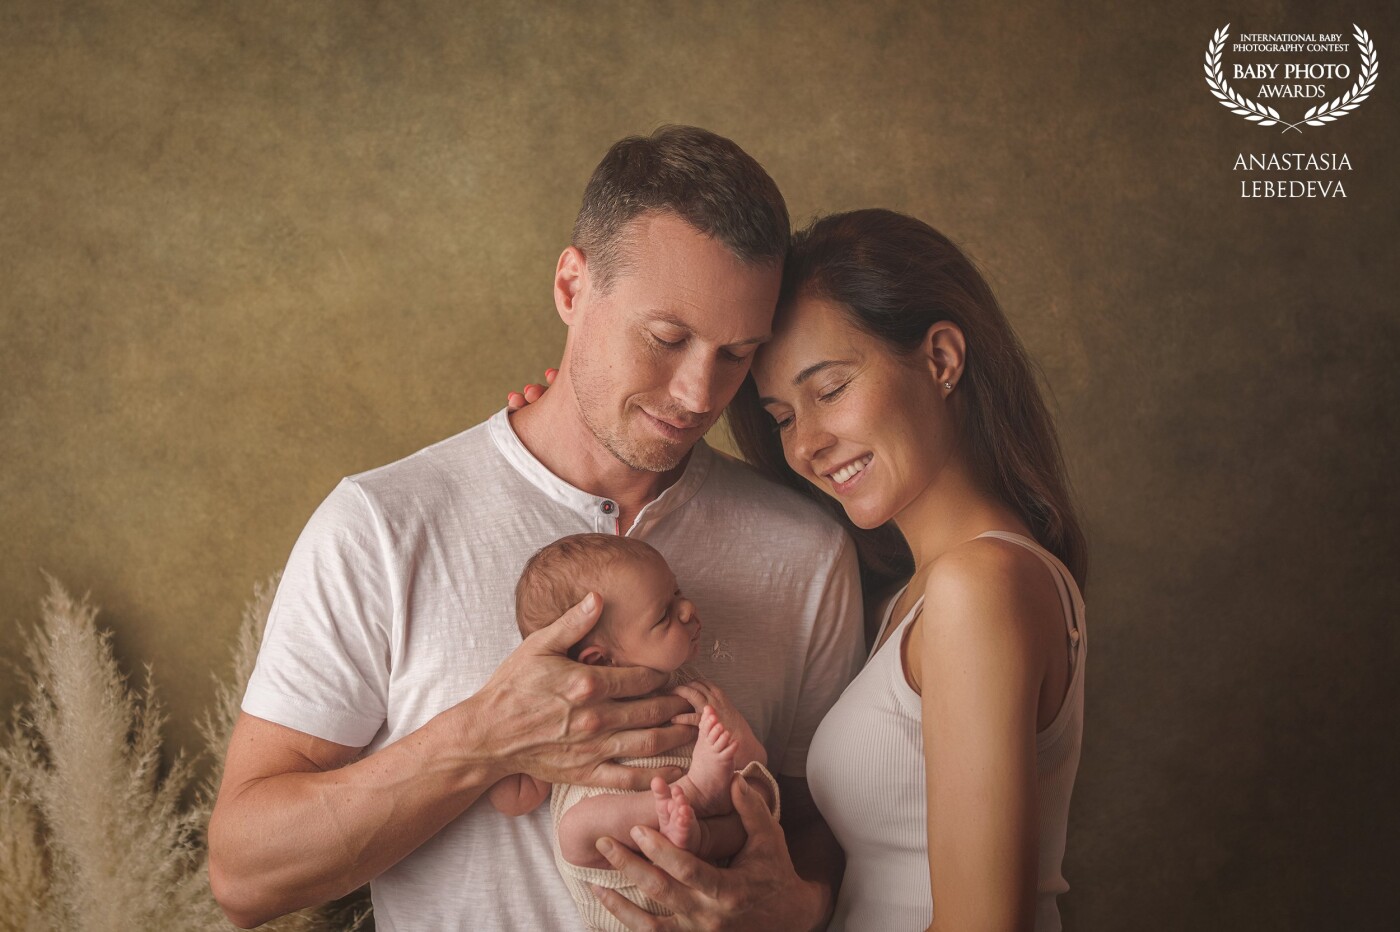 This photo captures happiness. The happiness of parents is in the hands of those who have a new life. Little newborn baby. Love and harmony and this is happiness.